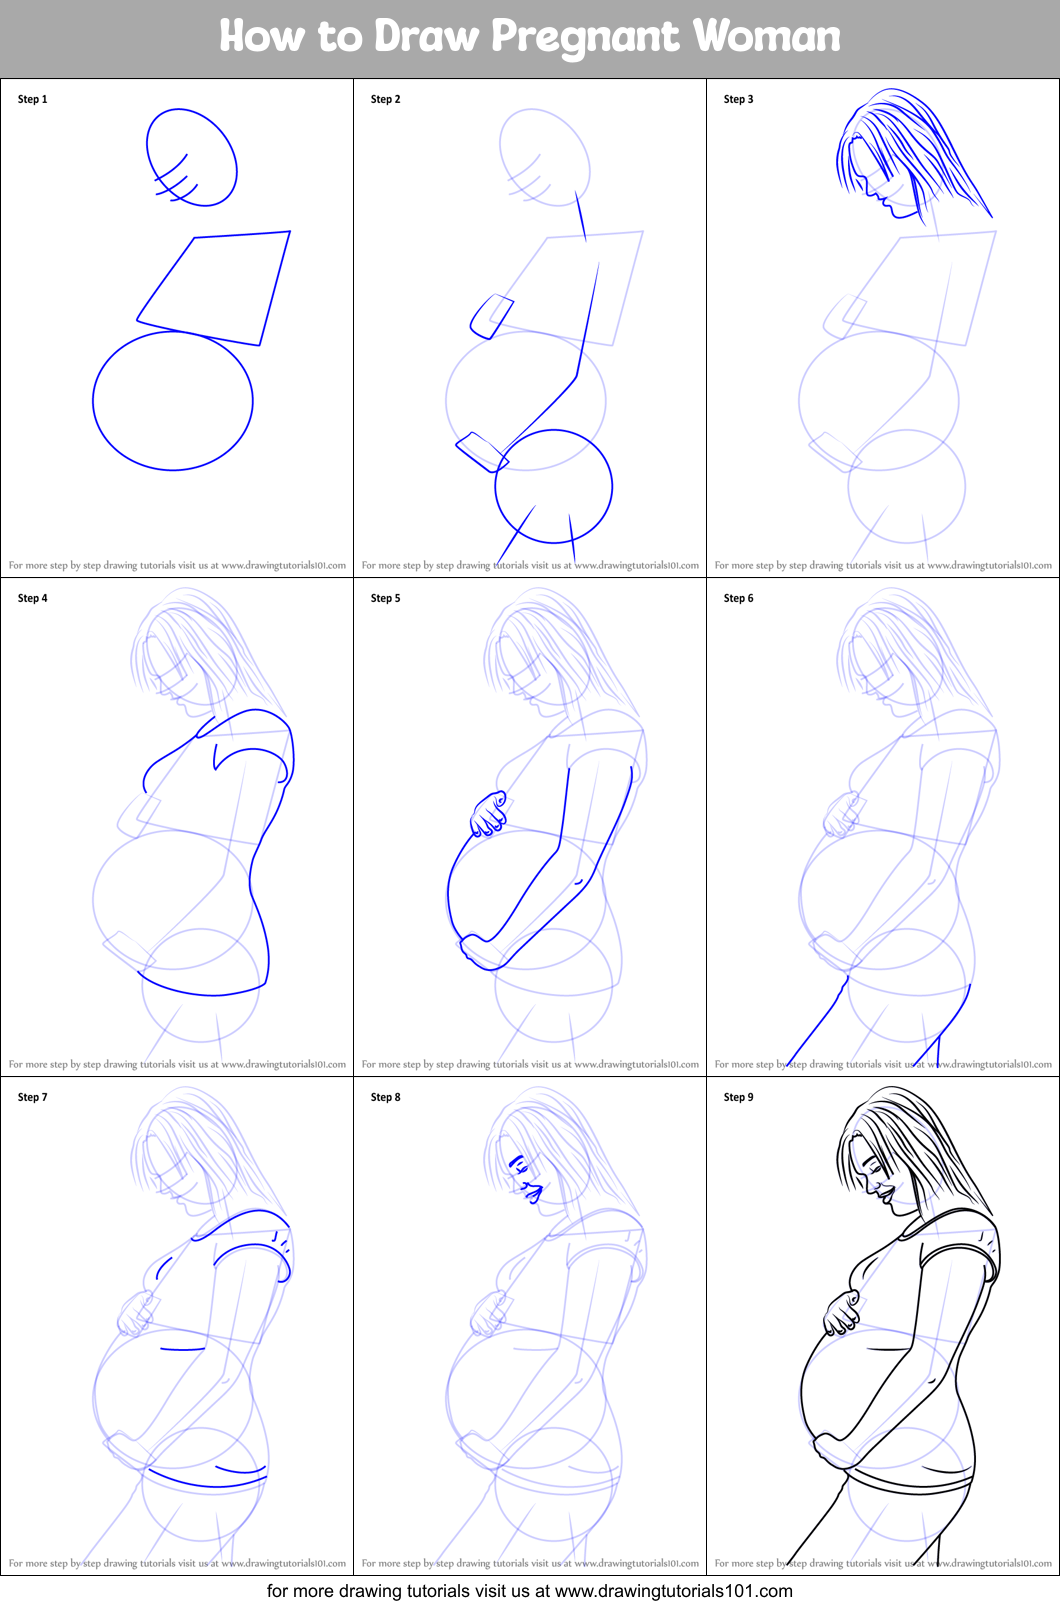 How to Draw Pregnant Woman printable step by step drawing